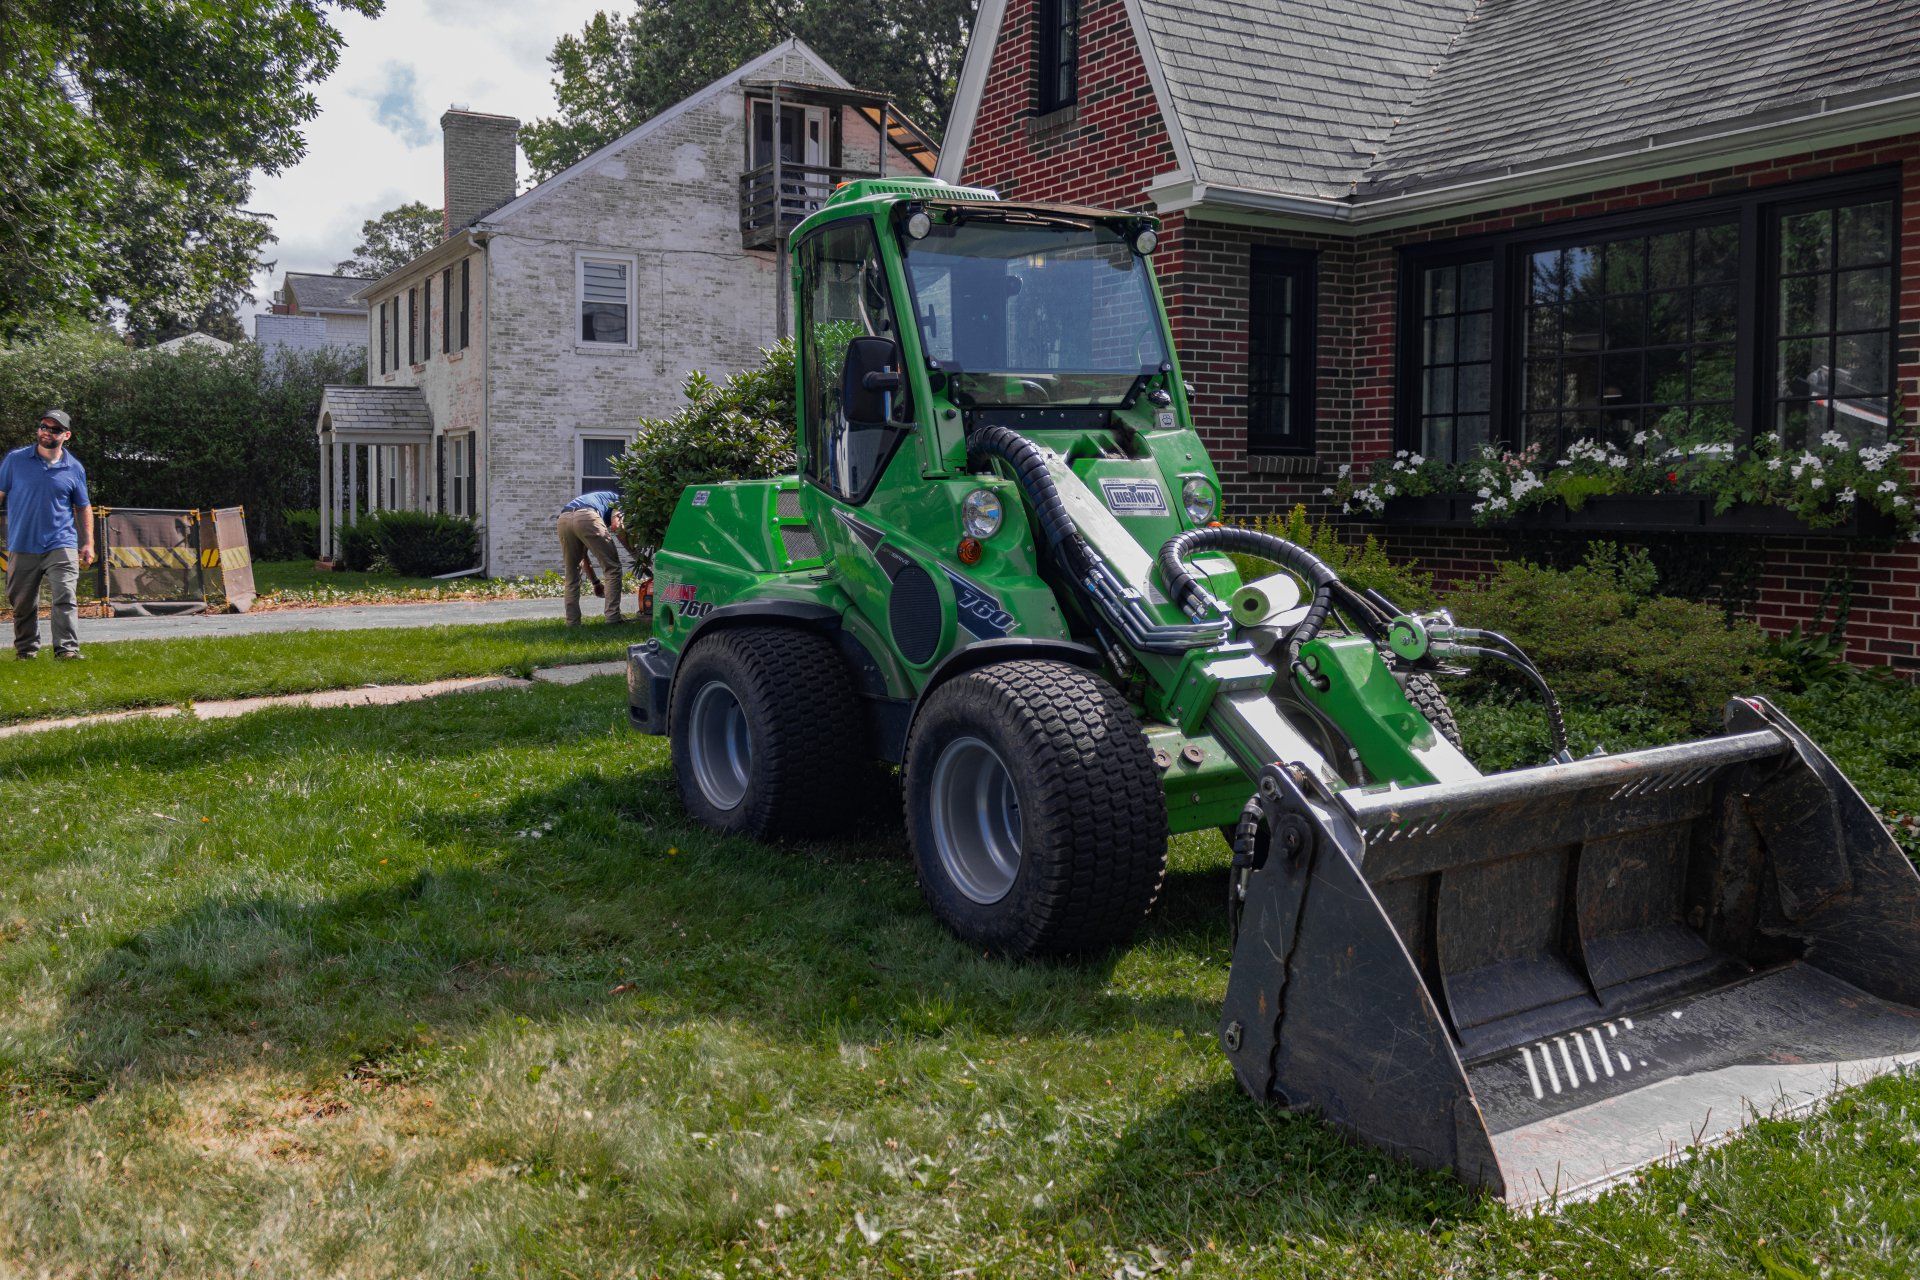 The best tree removal and stump removal in Maryland